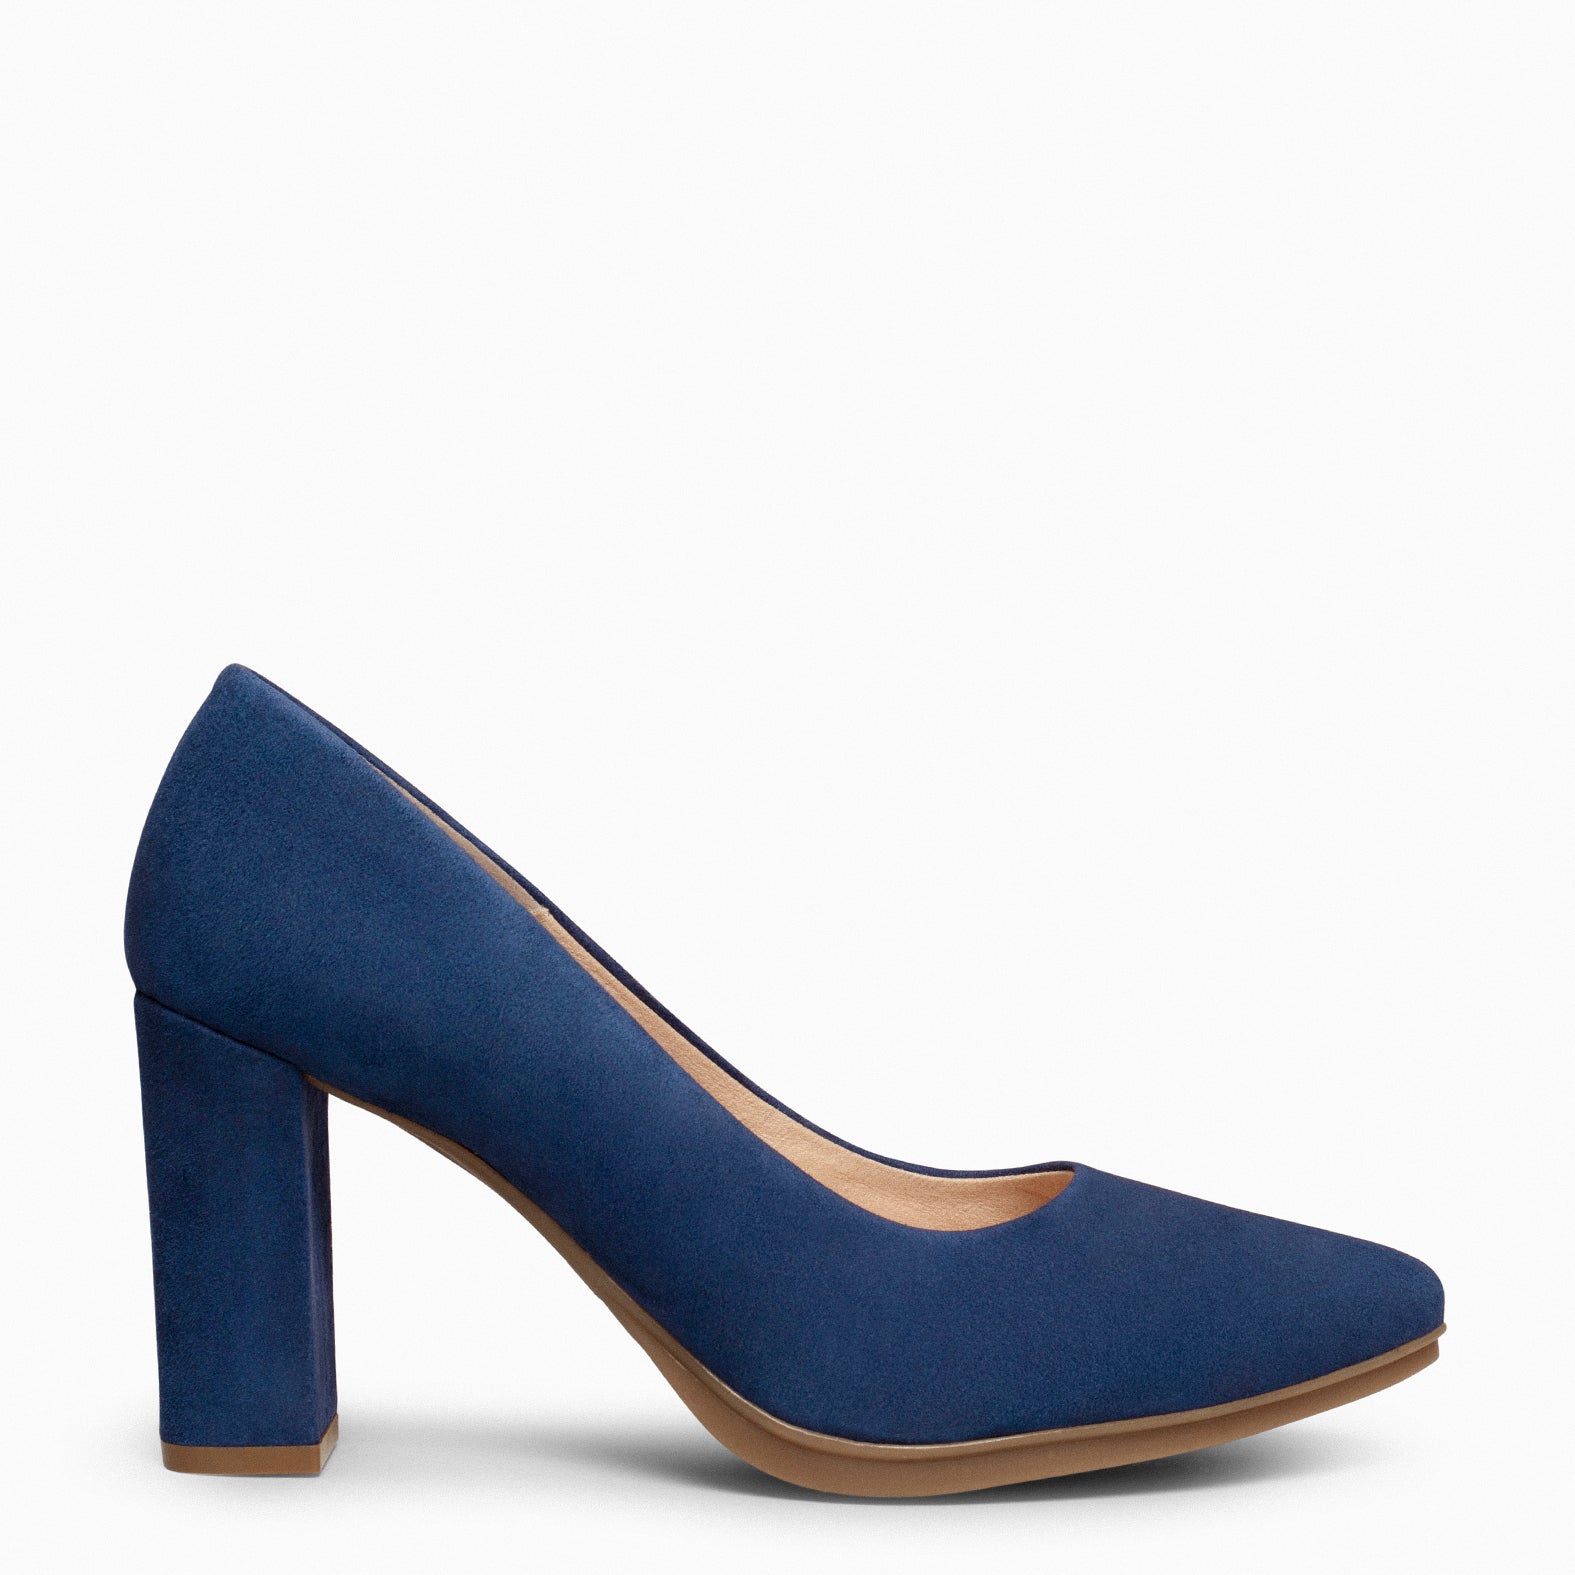 URBAN – NAVY Suede high-heeled shoes 